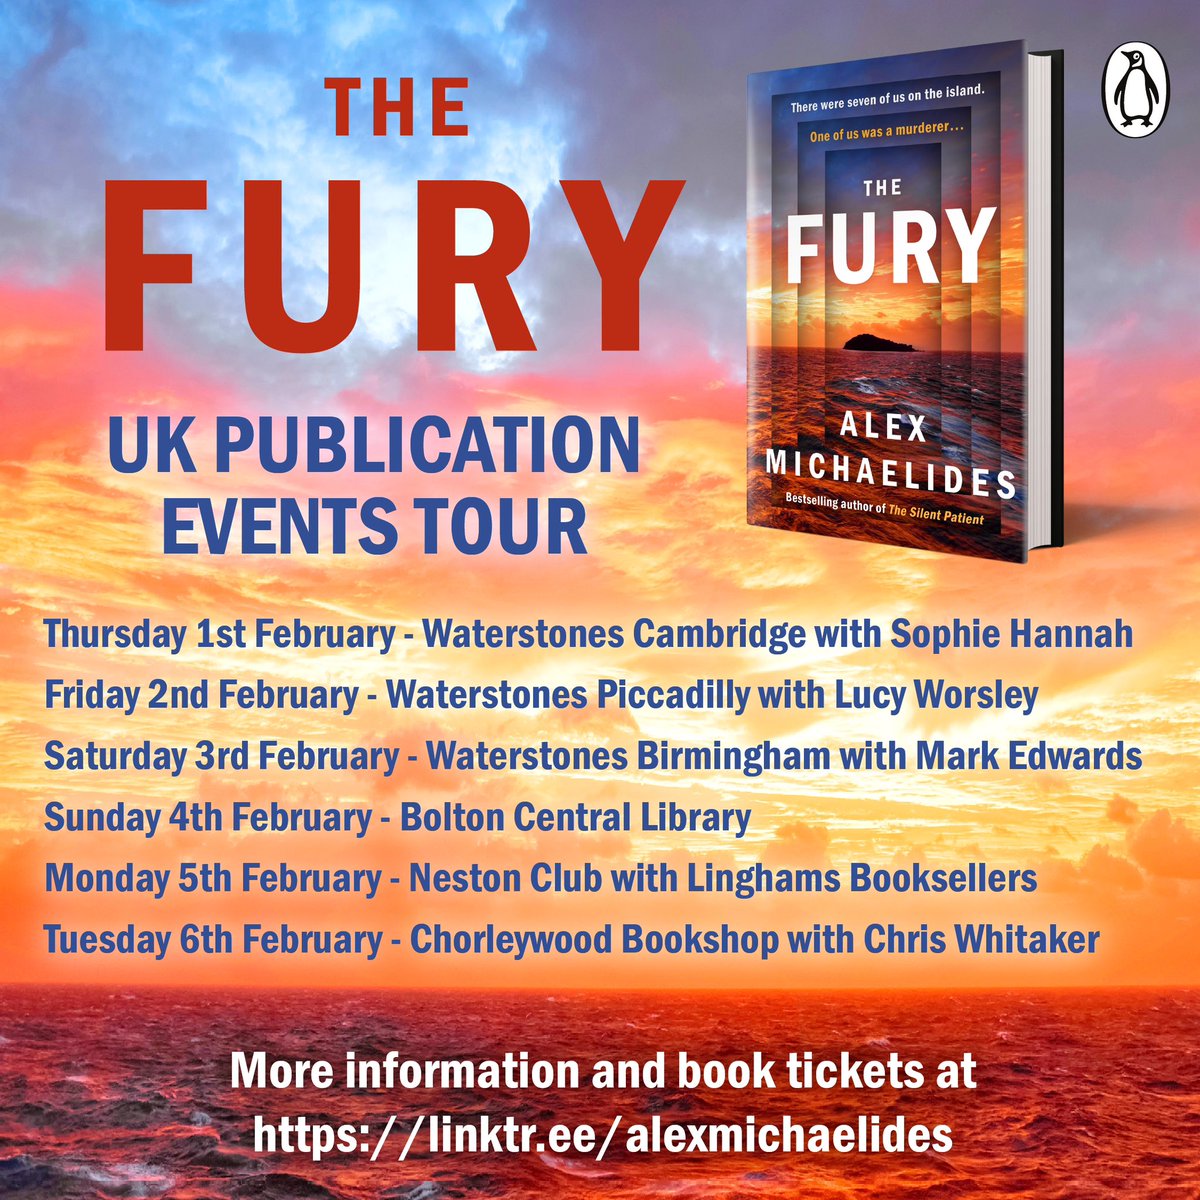 Here are the dates of my UK events, where I’ll be in conversation with @sophiehannahCB1, @mredwards, @WhittyAuthor, @Lucy_Worsley, among others. I’m excited to meet readers and booksellers in the UK! You can get tickets at linktr.ee/alexmichaelides